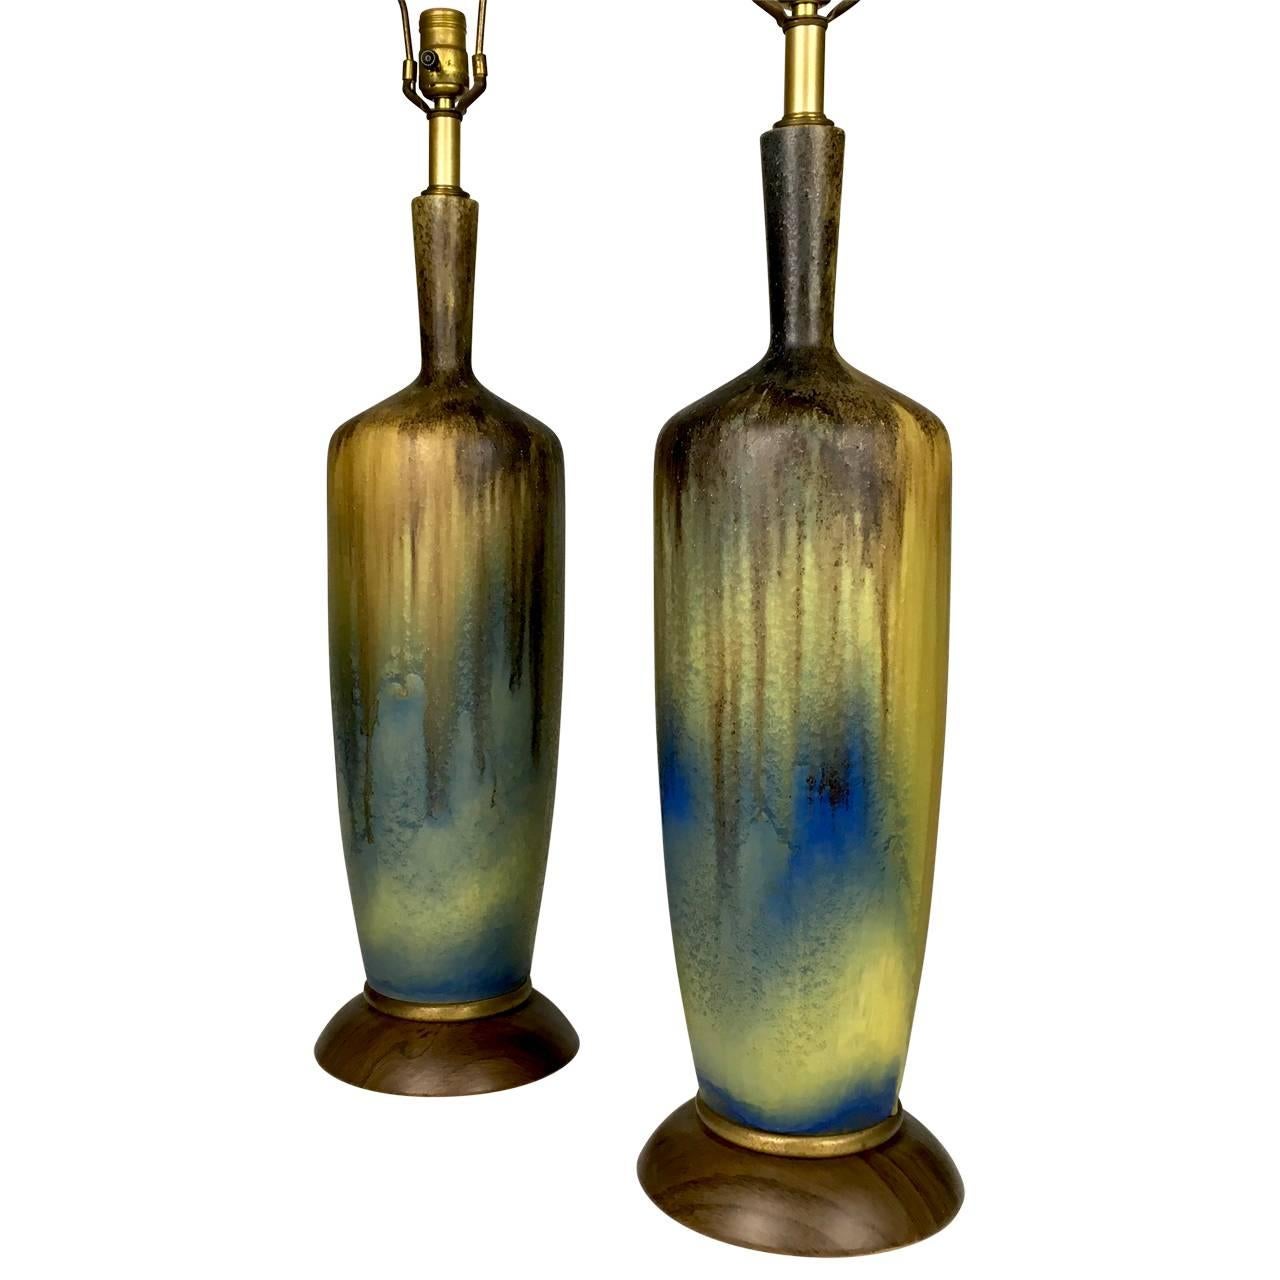 A fabulous pair of large Mid-Century, 1950s table lamps. 
Beautiful textured volcanic drip.
Glaze ceramic form with matte glaze color. Molten yellow, brown, blues on original walnut metal base.
Excellent Original Condition. Excellent wiring and